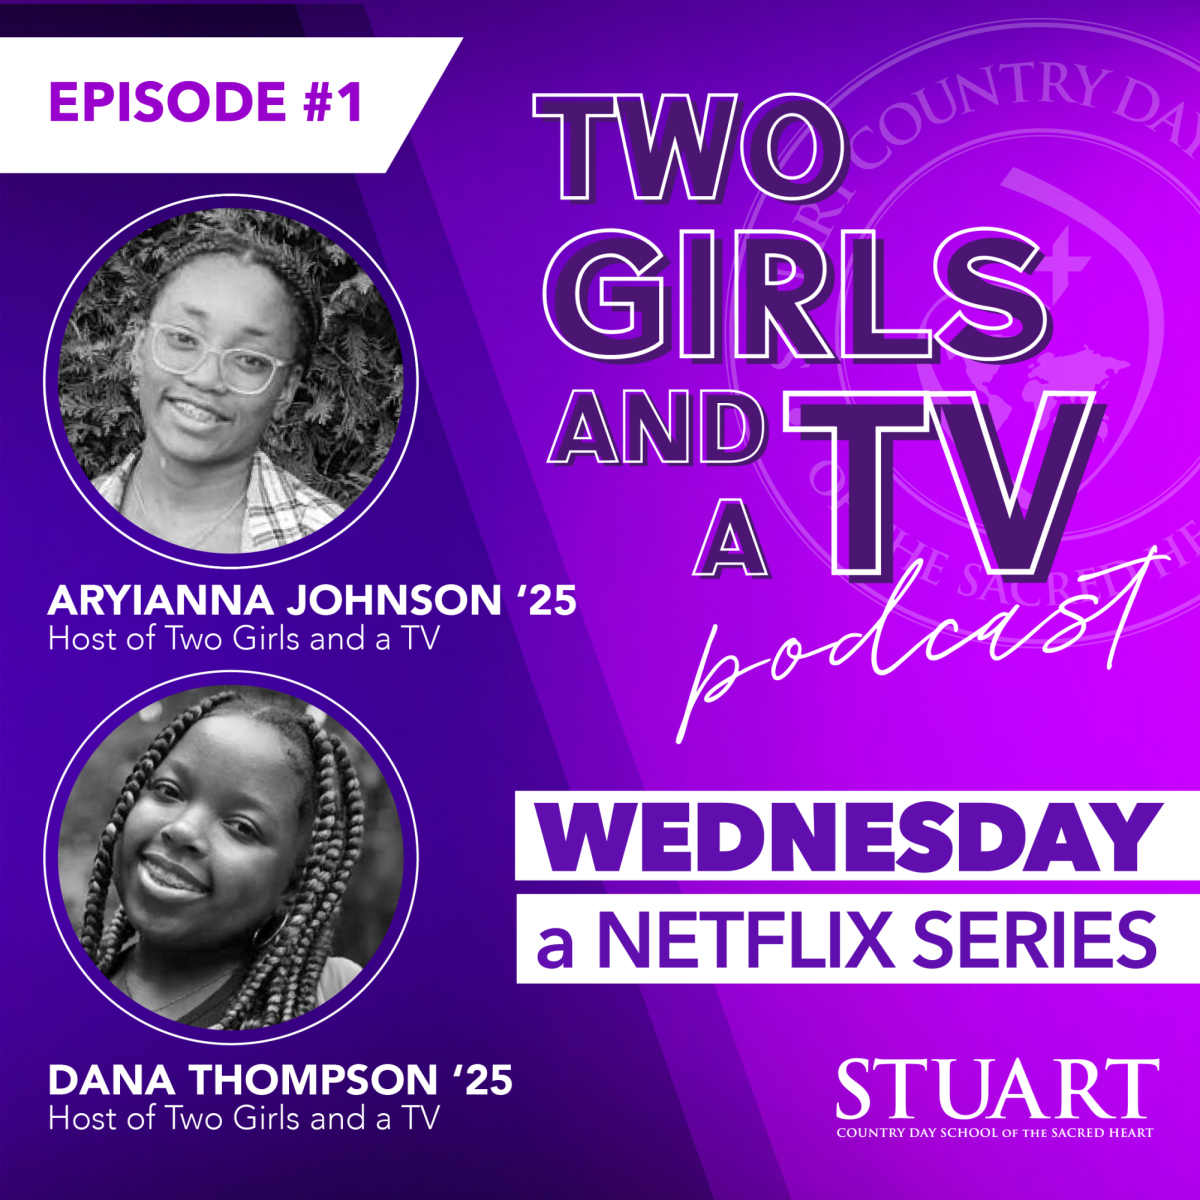 Two Girls and a TV: Wednesday